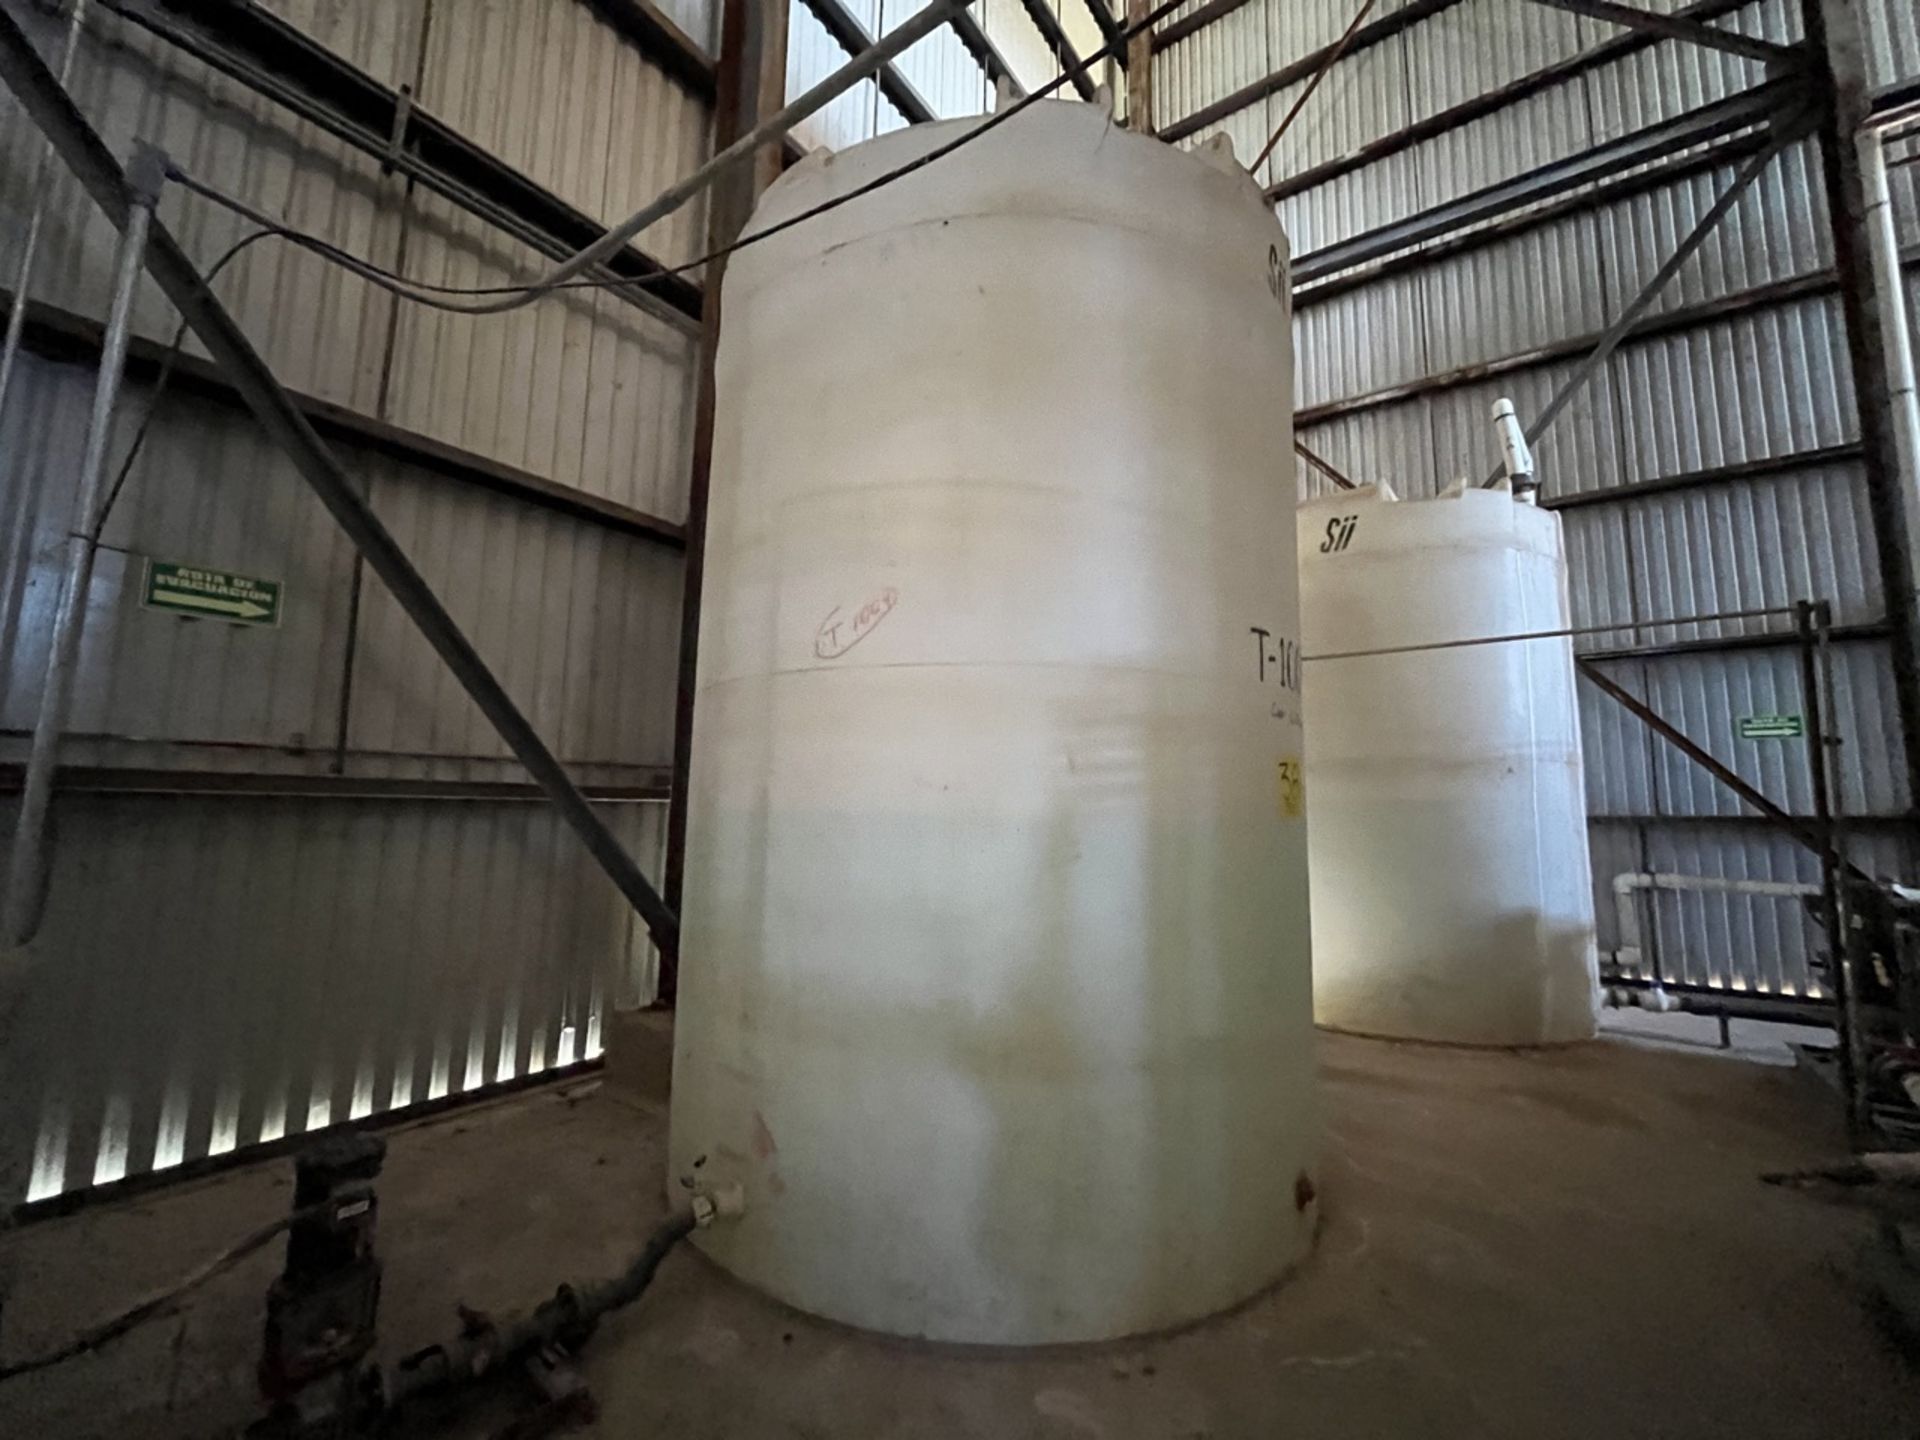 Plastic water storage tank with a capacity of 12,000 liters measuring approx 2.40 meters diameter x - Image 4 of 16